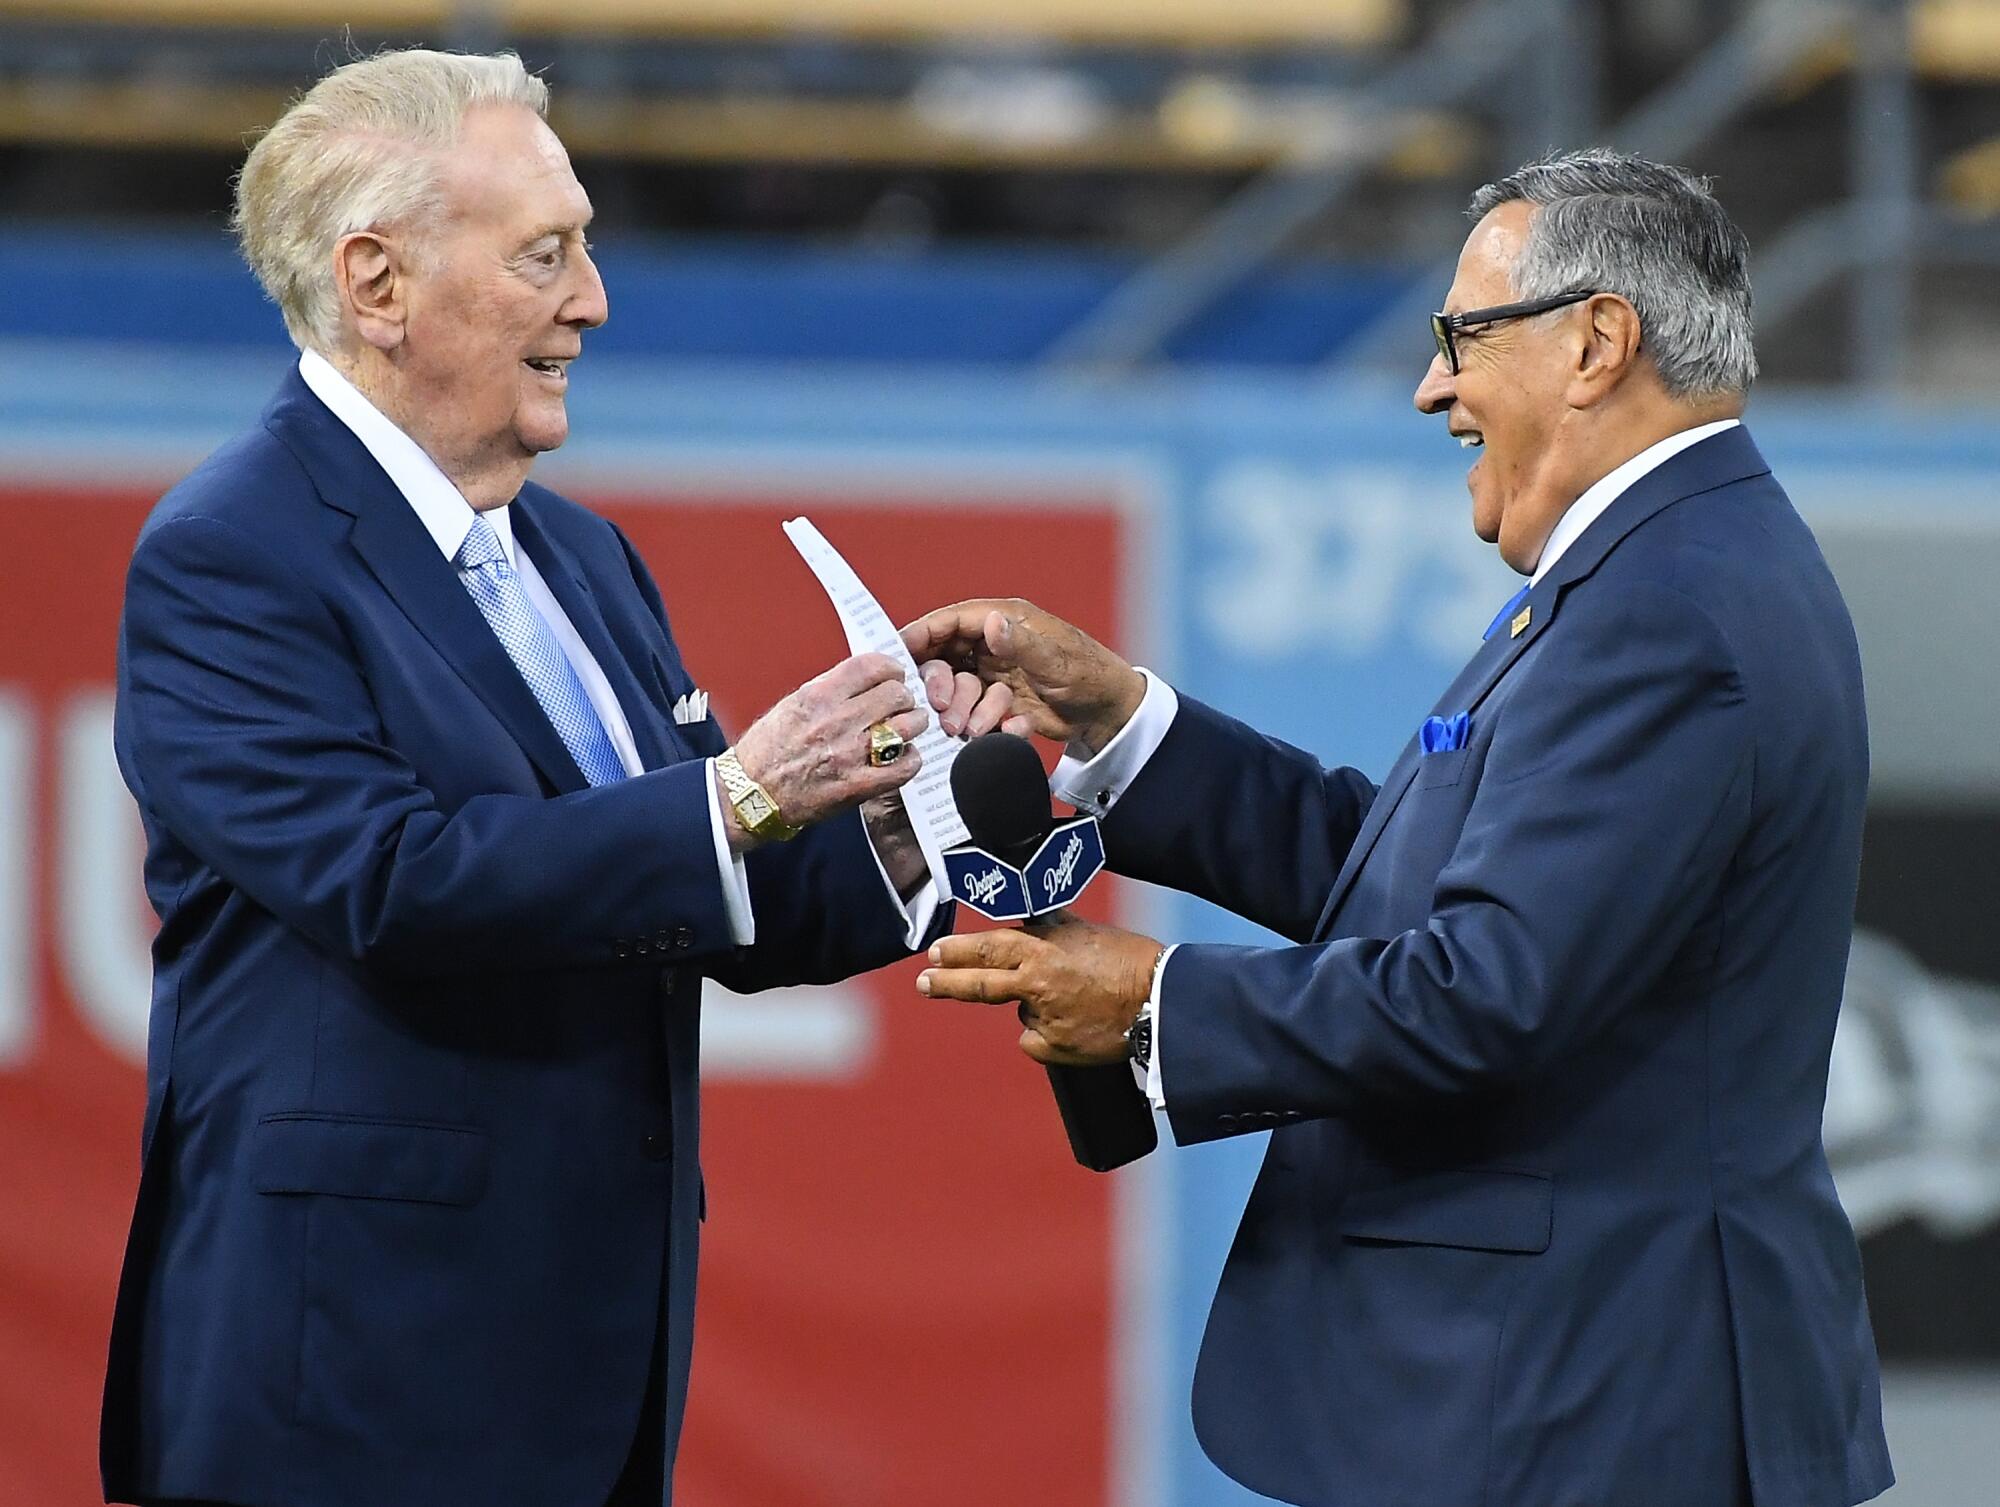 Dodgers: Jaime Jarrin Won't Let Retirement Stop Him From Making A